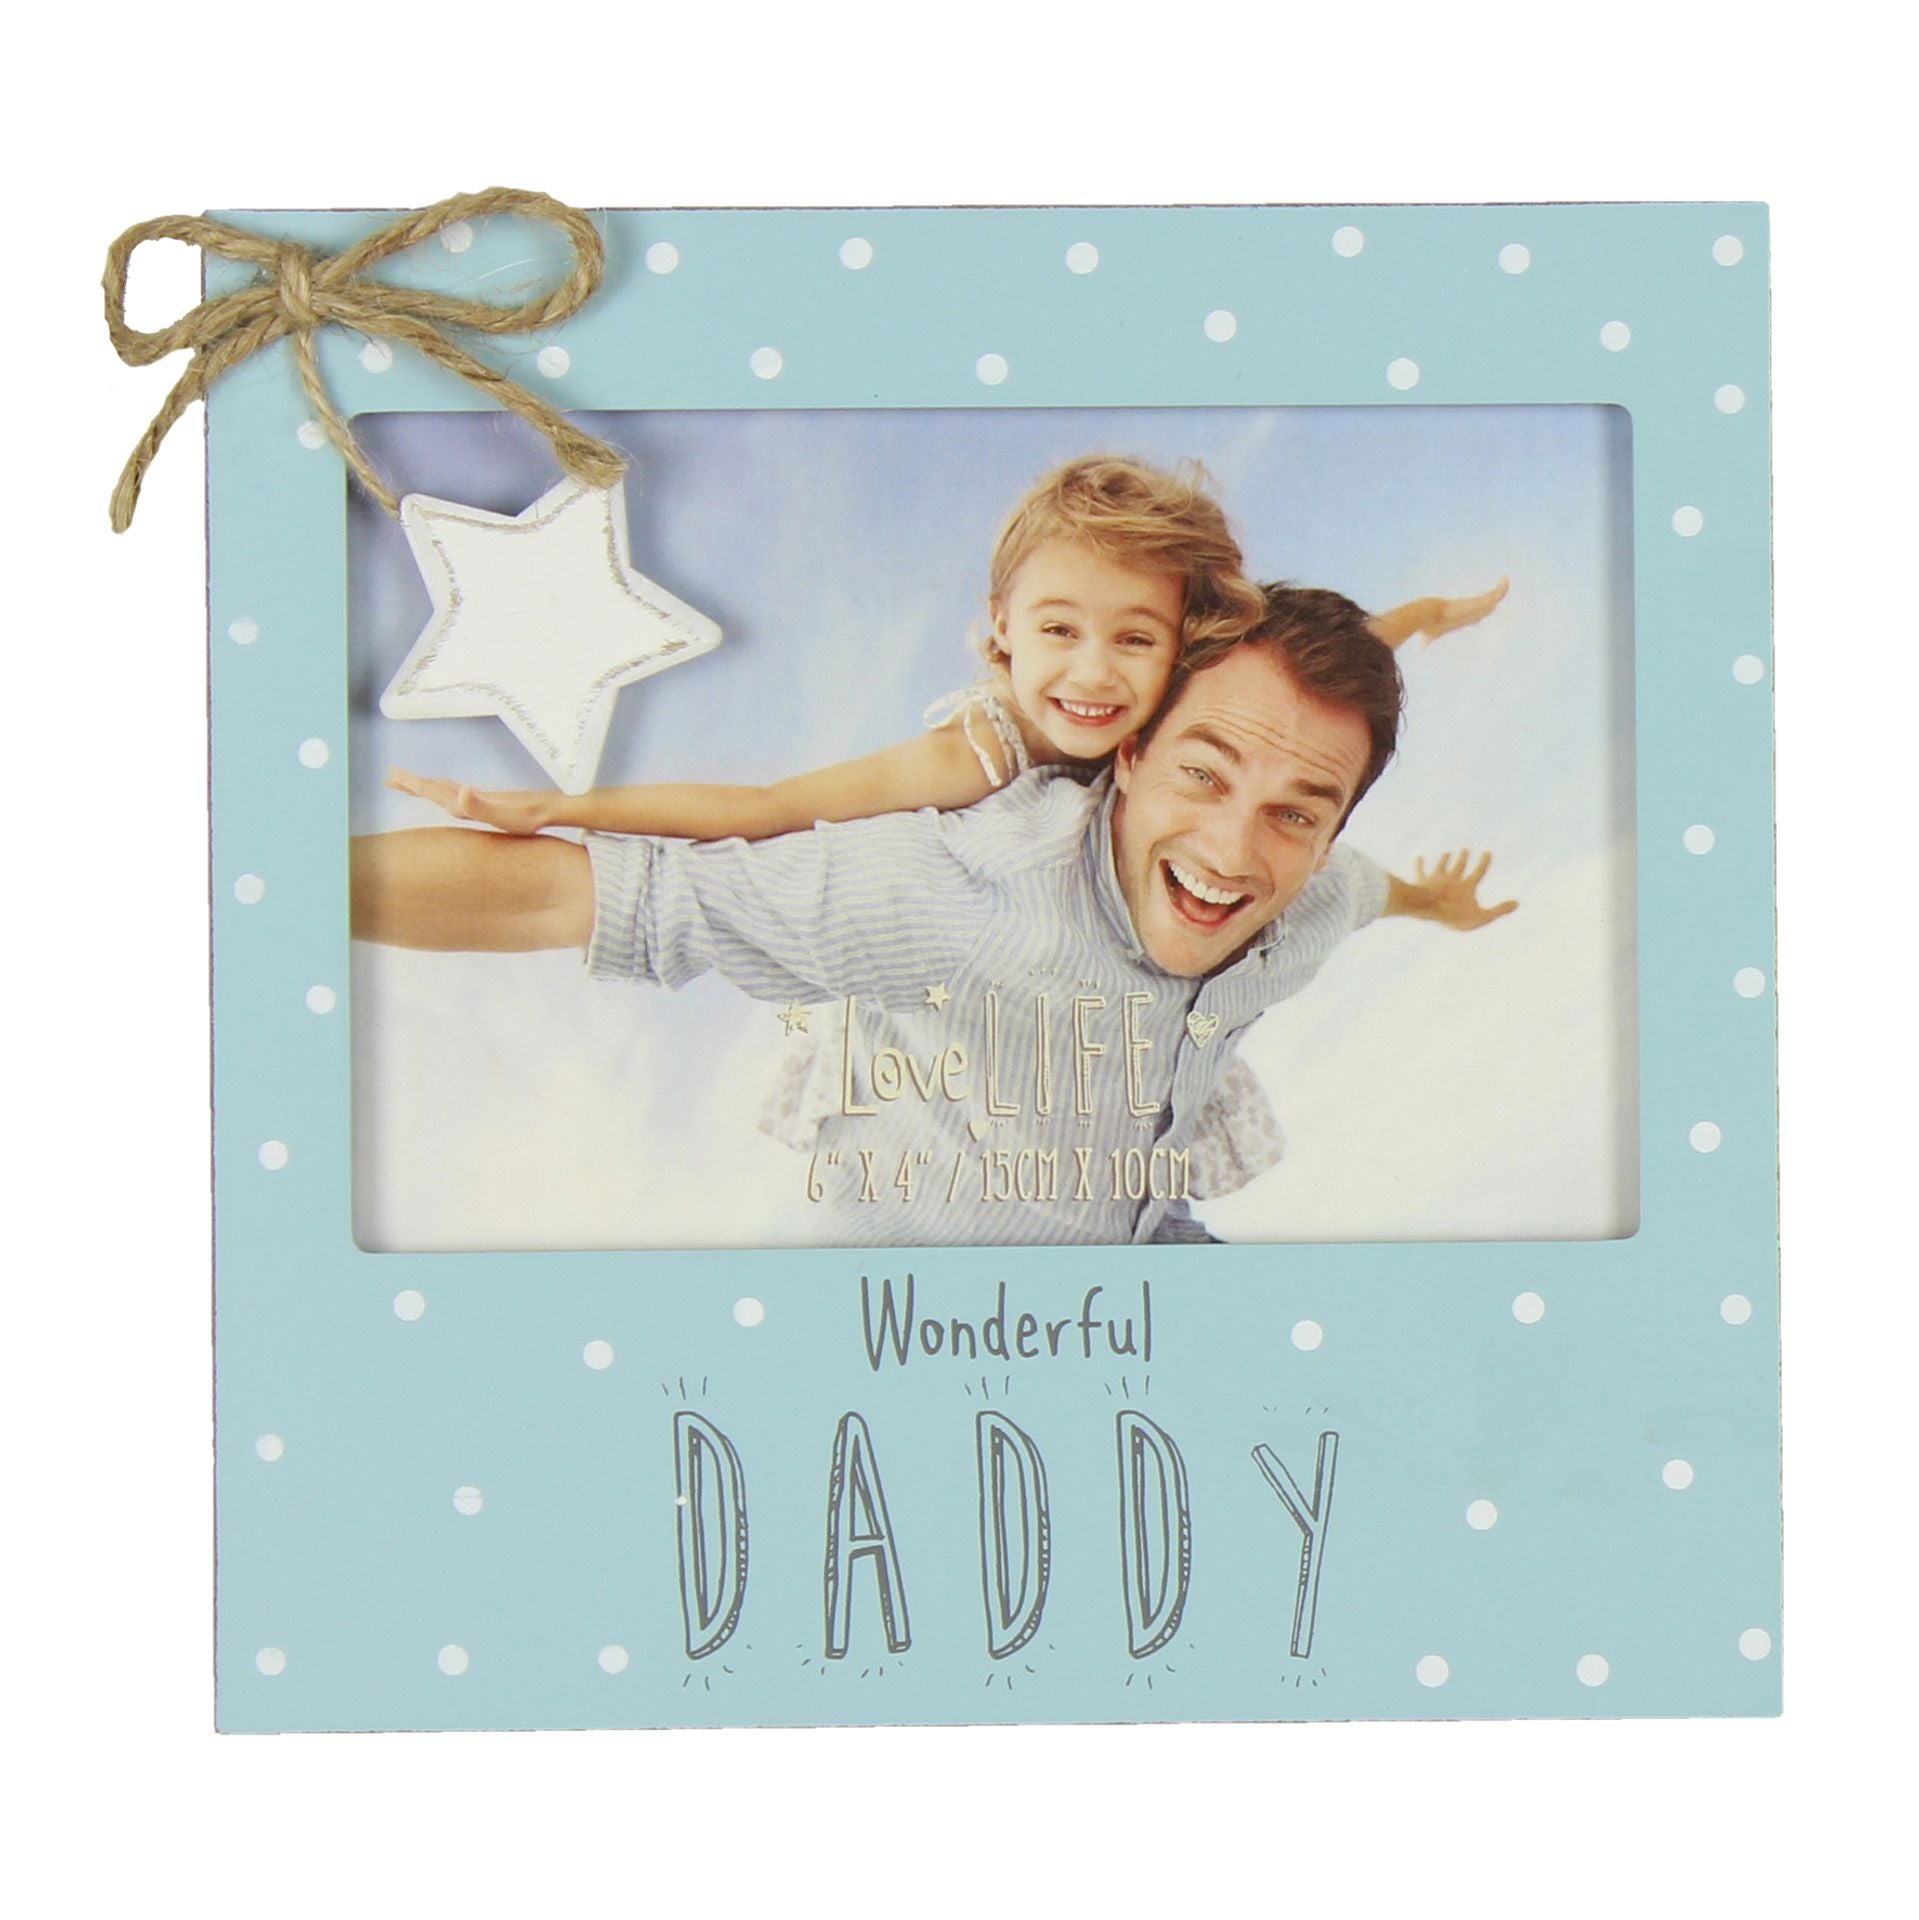 Let your Dad know just how special he is with this 'Wonderful Daddy' Photo Frame from Love Life. This stylish blue polka dot photo frame makes for a perfect gift to a Dad on Father's Day, their birthday or any other special occasion.